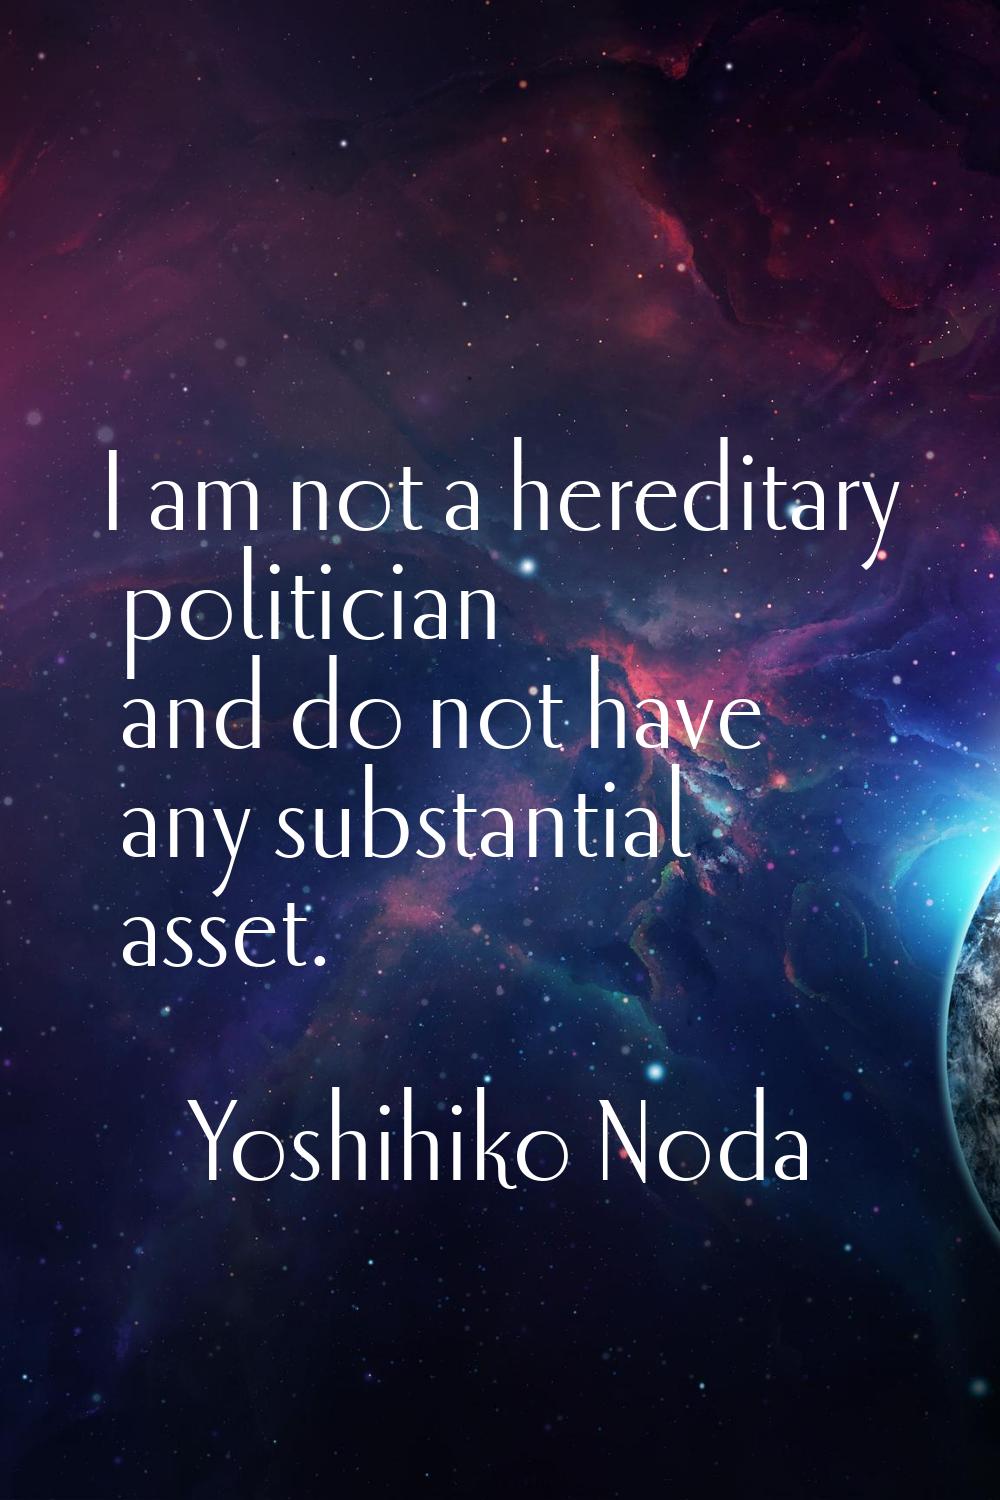 I am not a hereditary politician and do not have any substantial asset.